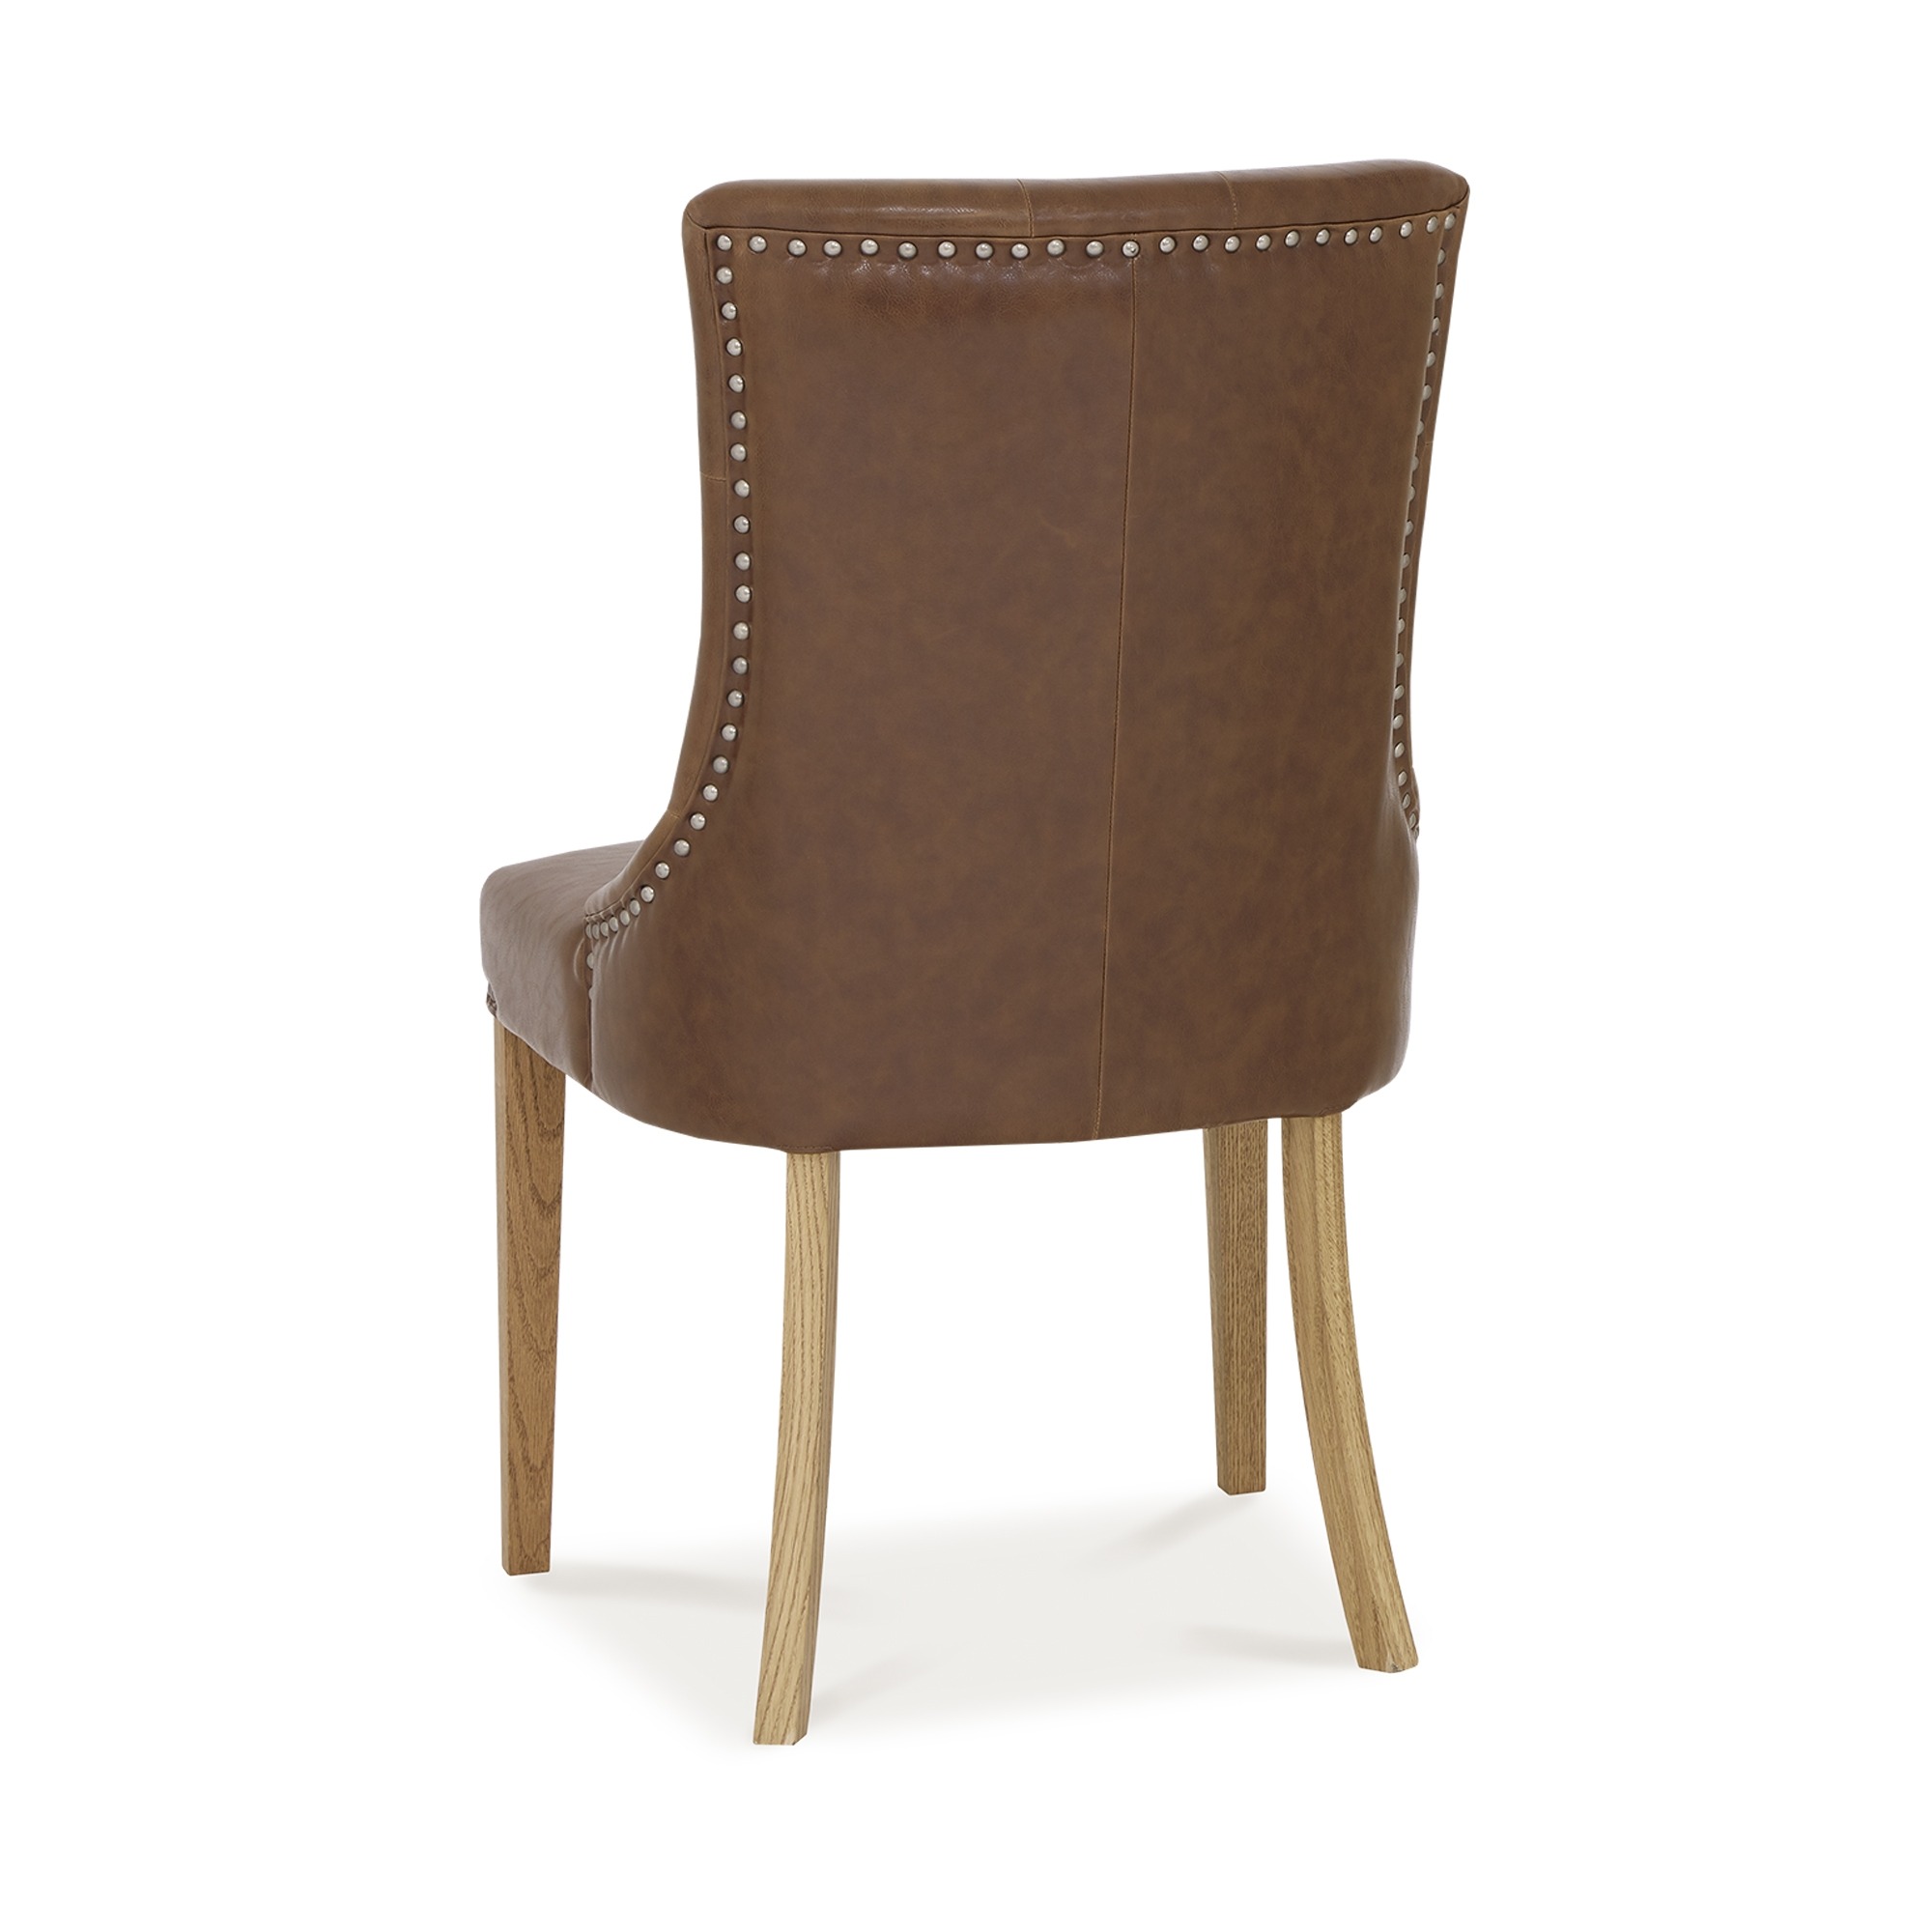 Westbury Tan Rustic Oak Upholstered Arm Chair - Style Our Home